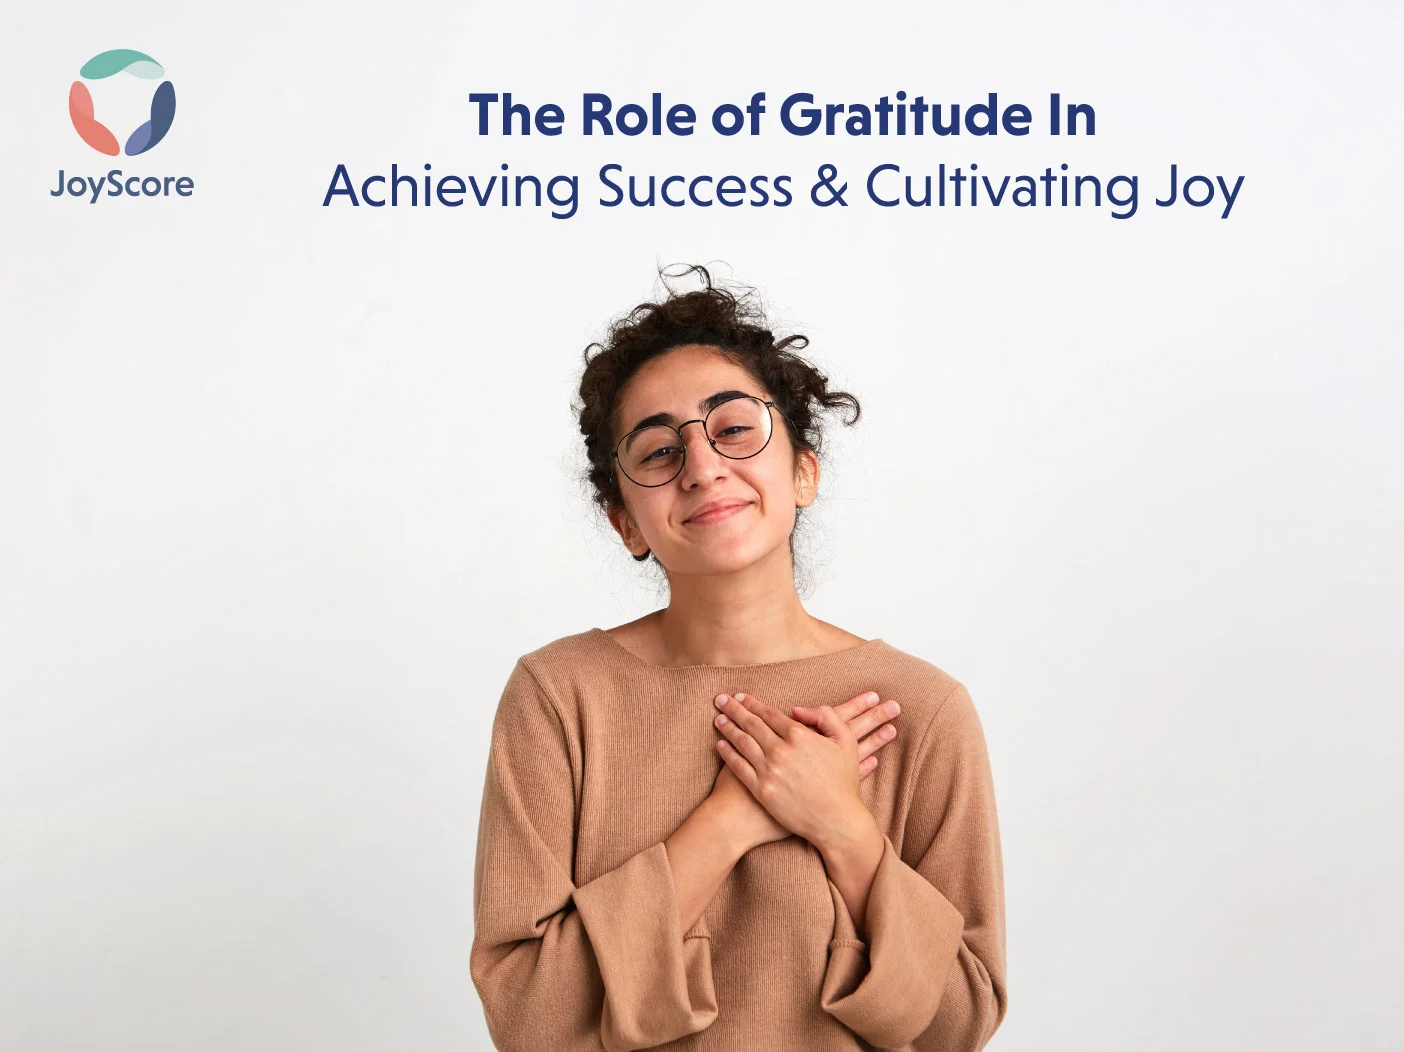 THE ROLE OF GRATITUDE IN ACHIEVING SUCCESS AND CULTIVATING JOY